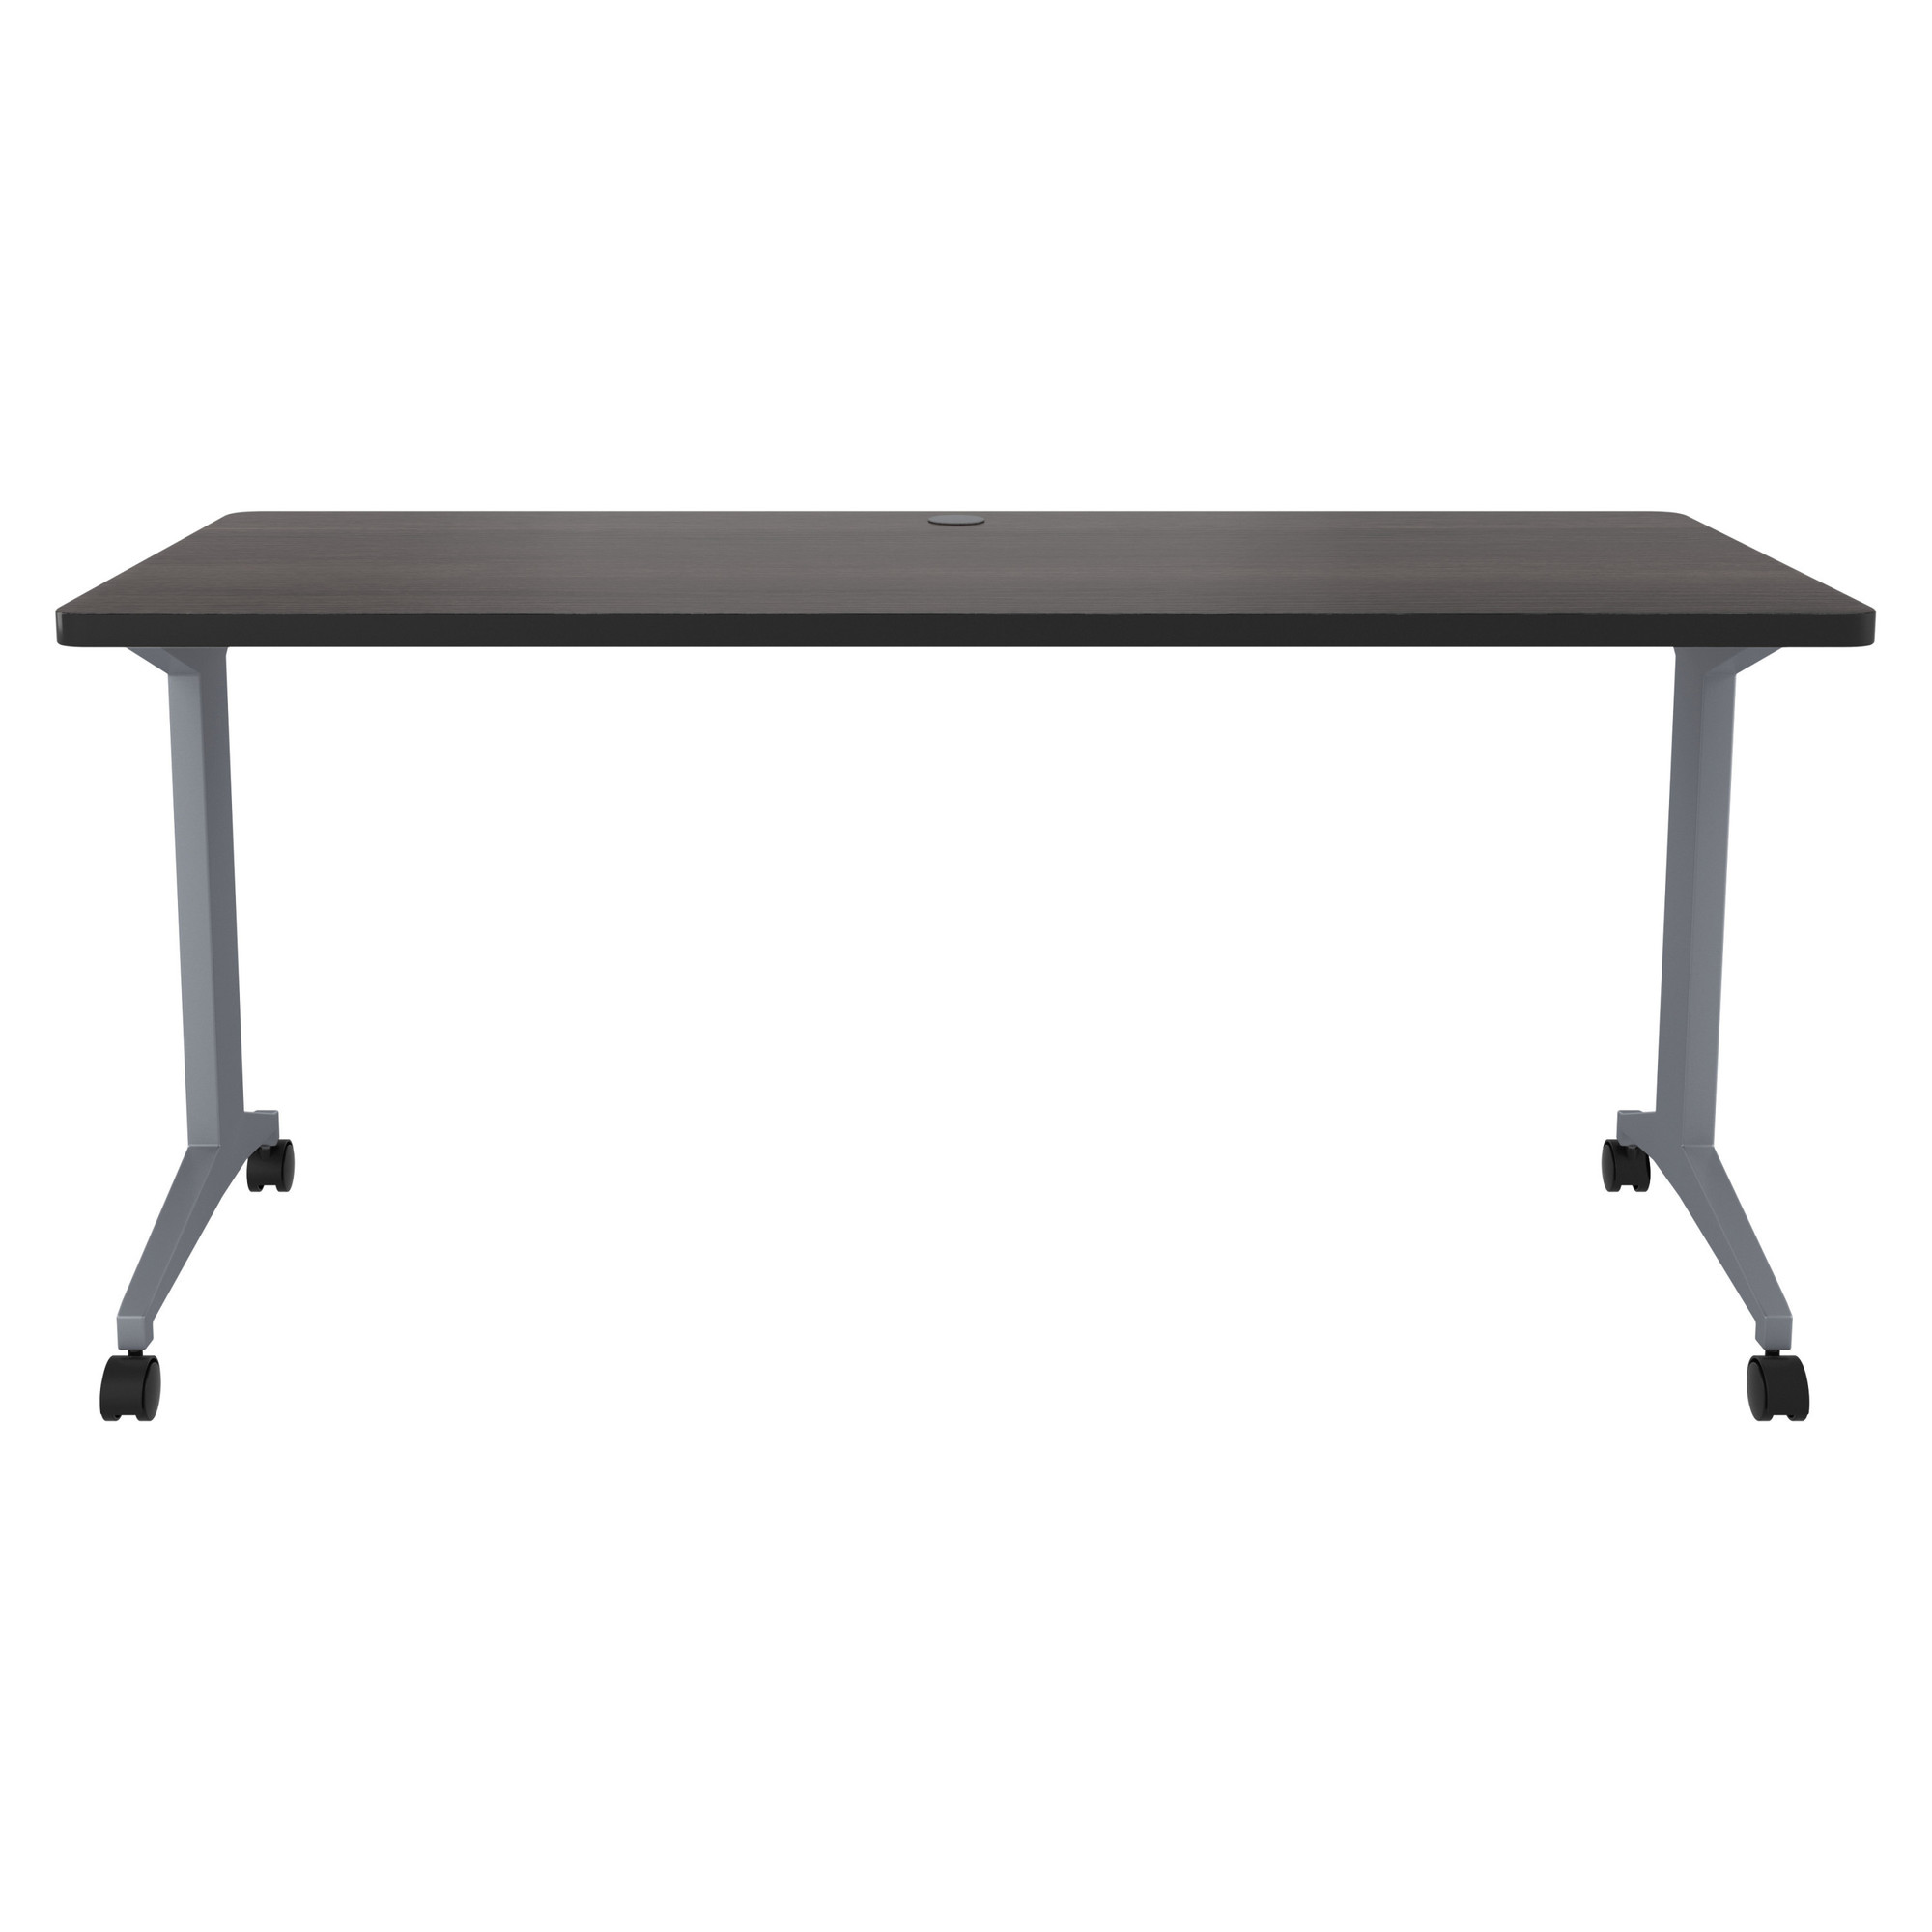 Hirsh Industries, T-Leg Table Desk with Rounded Corner T-Mold Top, Width 60 in, Height 28.75 in, Depth 24 in, Model 24374